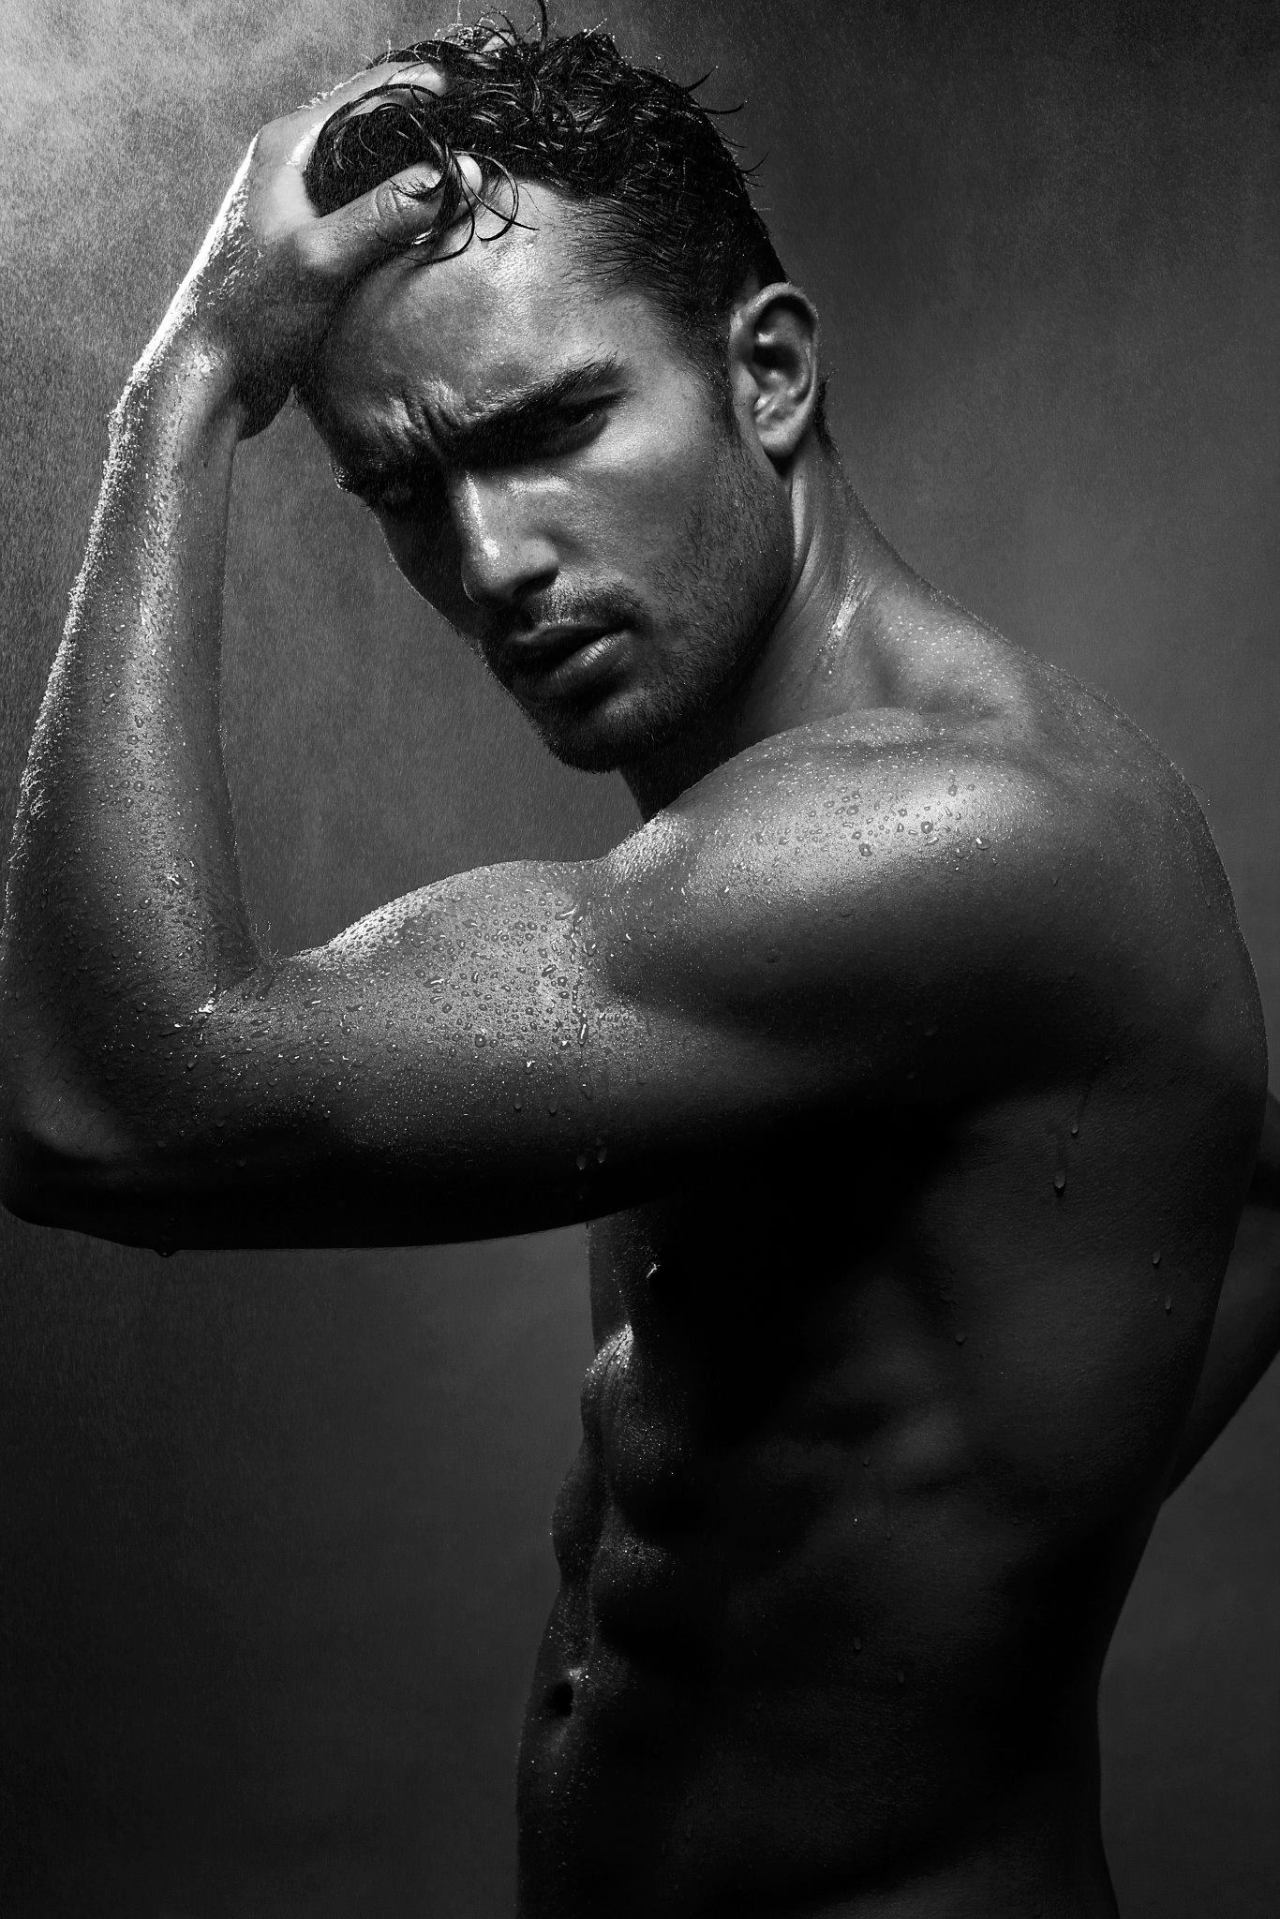 guytopia:  handsomemales:  andré costa by simon minardi for caleo mag.  GUYT♂PIA